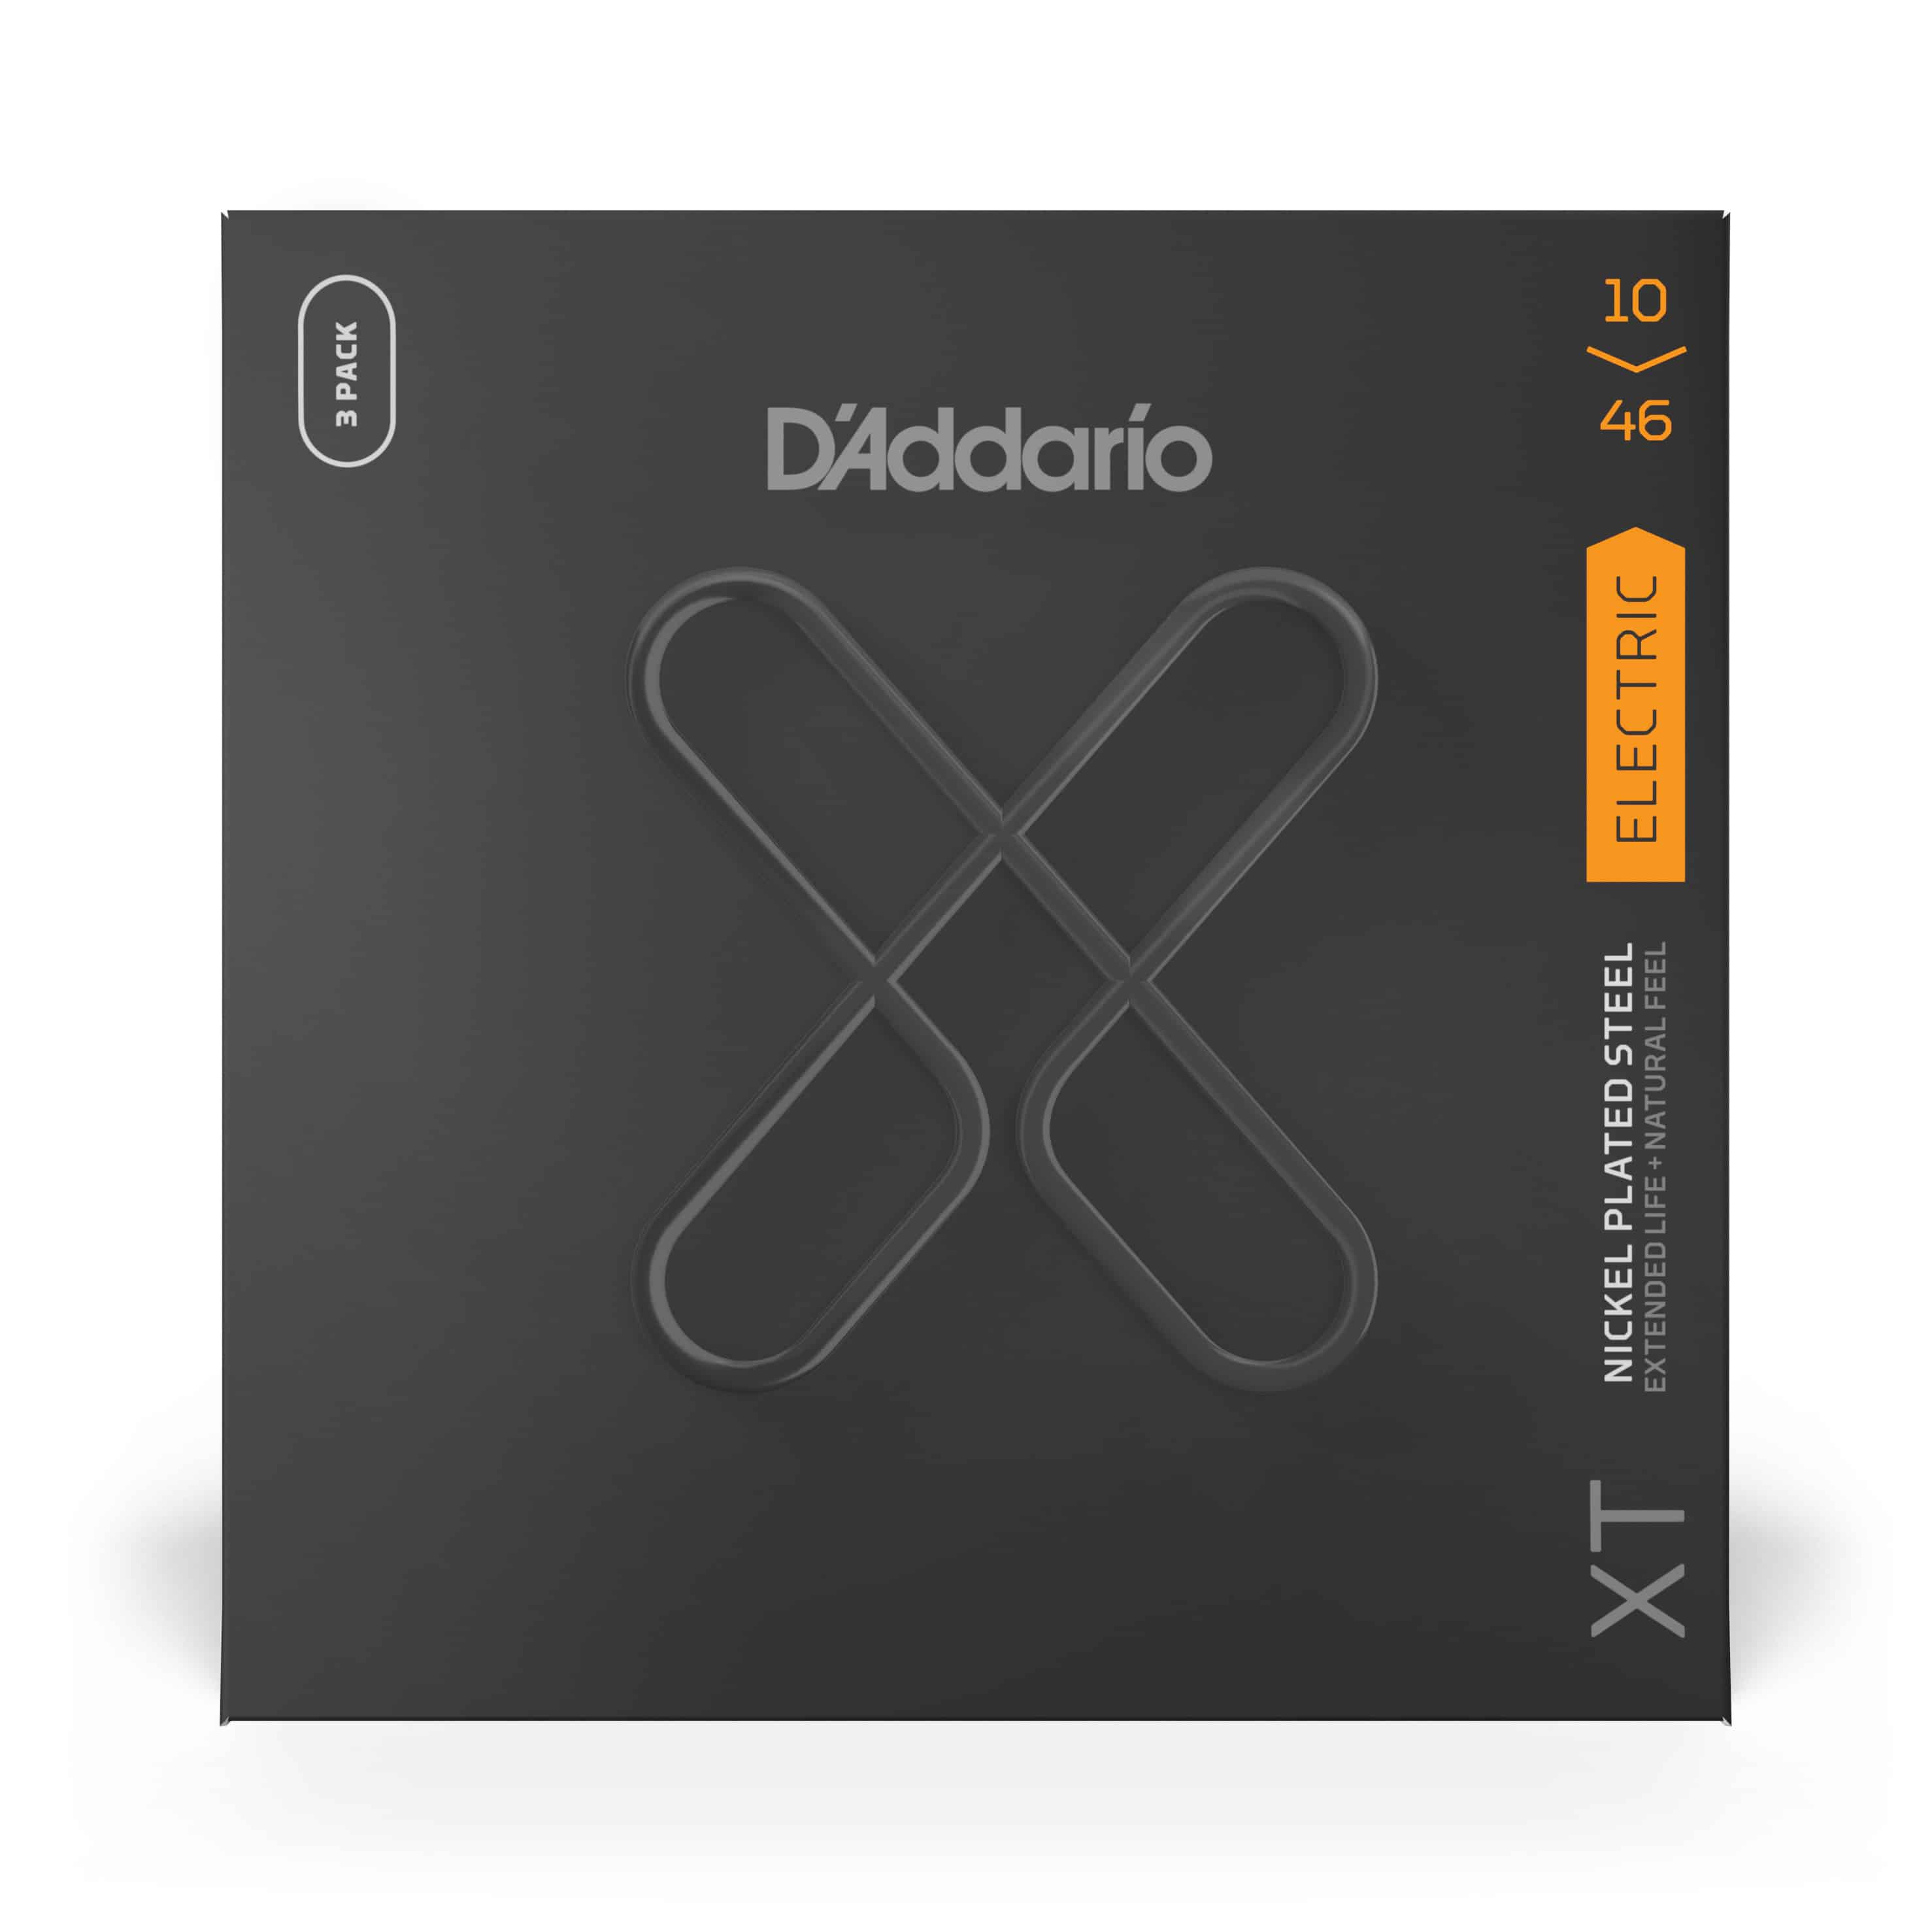 D’Addario Expands XT String Line To A Wider Range Of Stringed Instruments